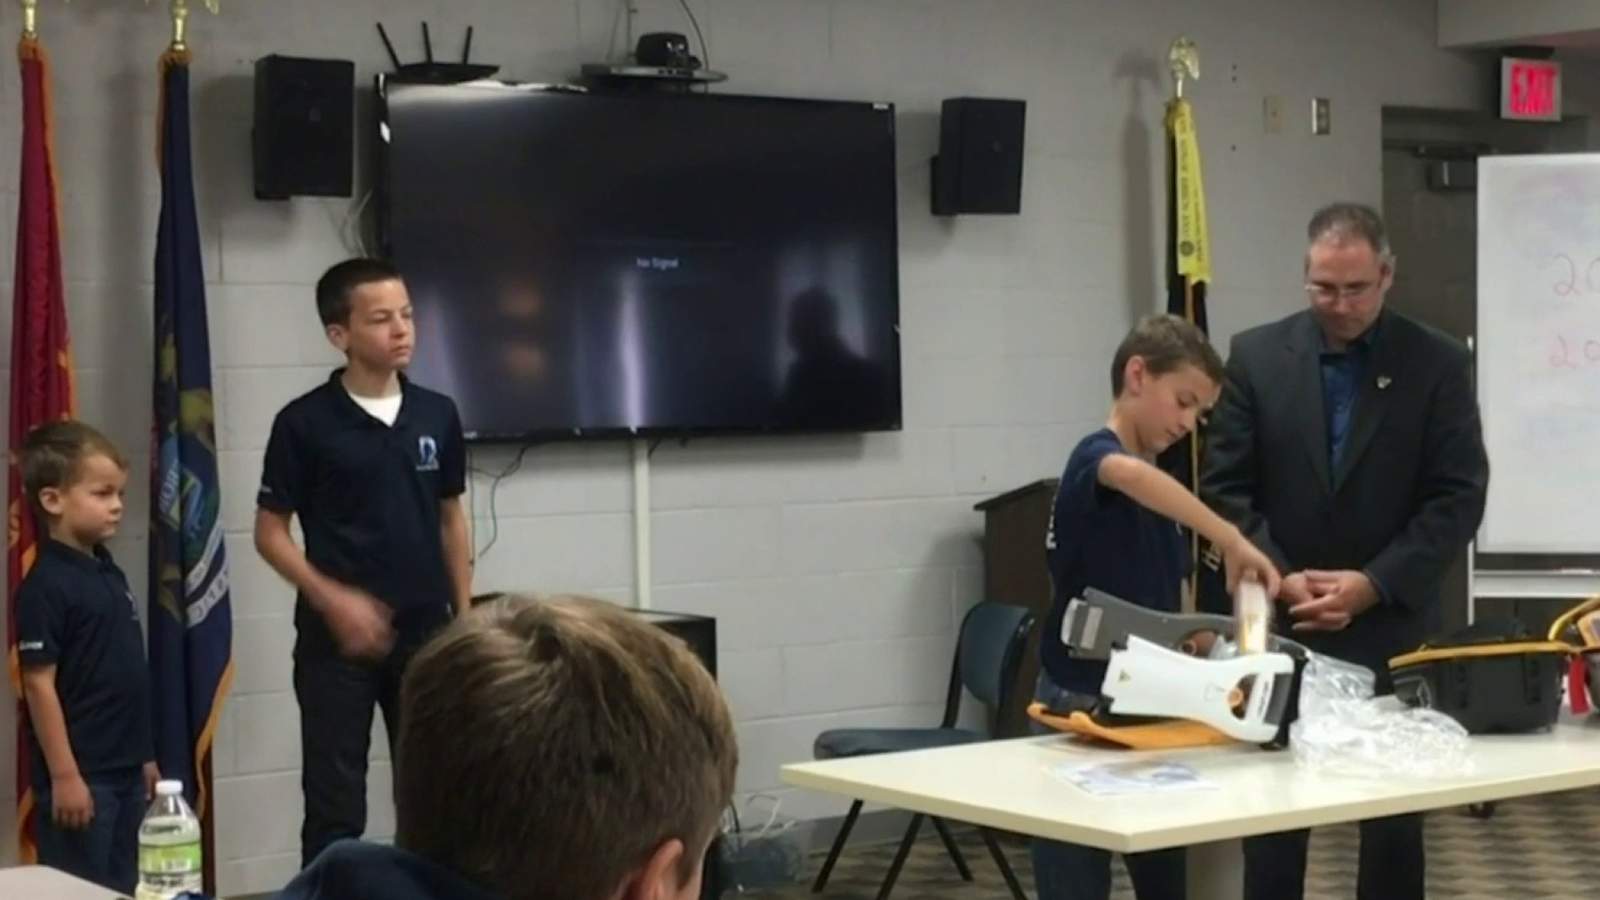 Michigan boy raises thousands of dollars to buy machines for 7 fire departments